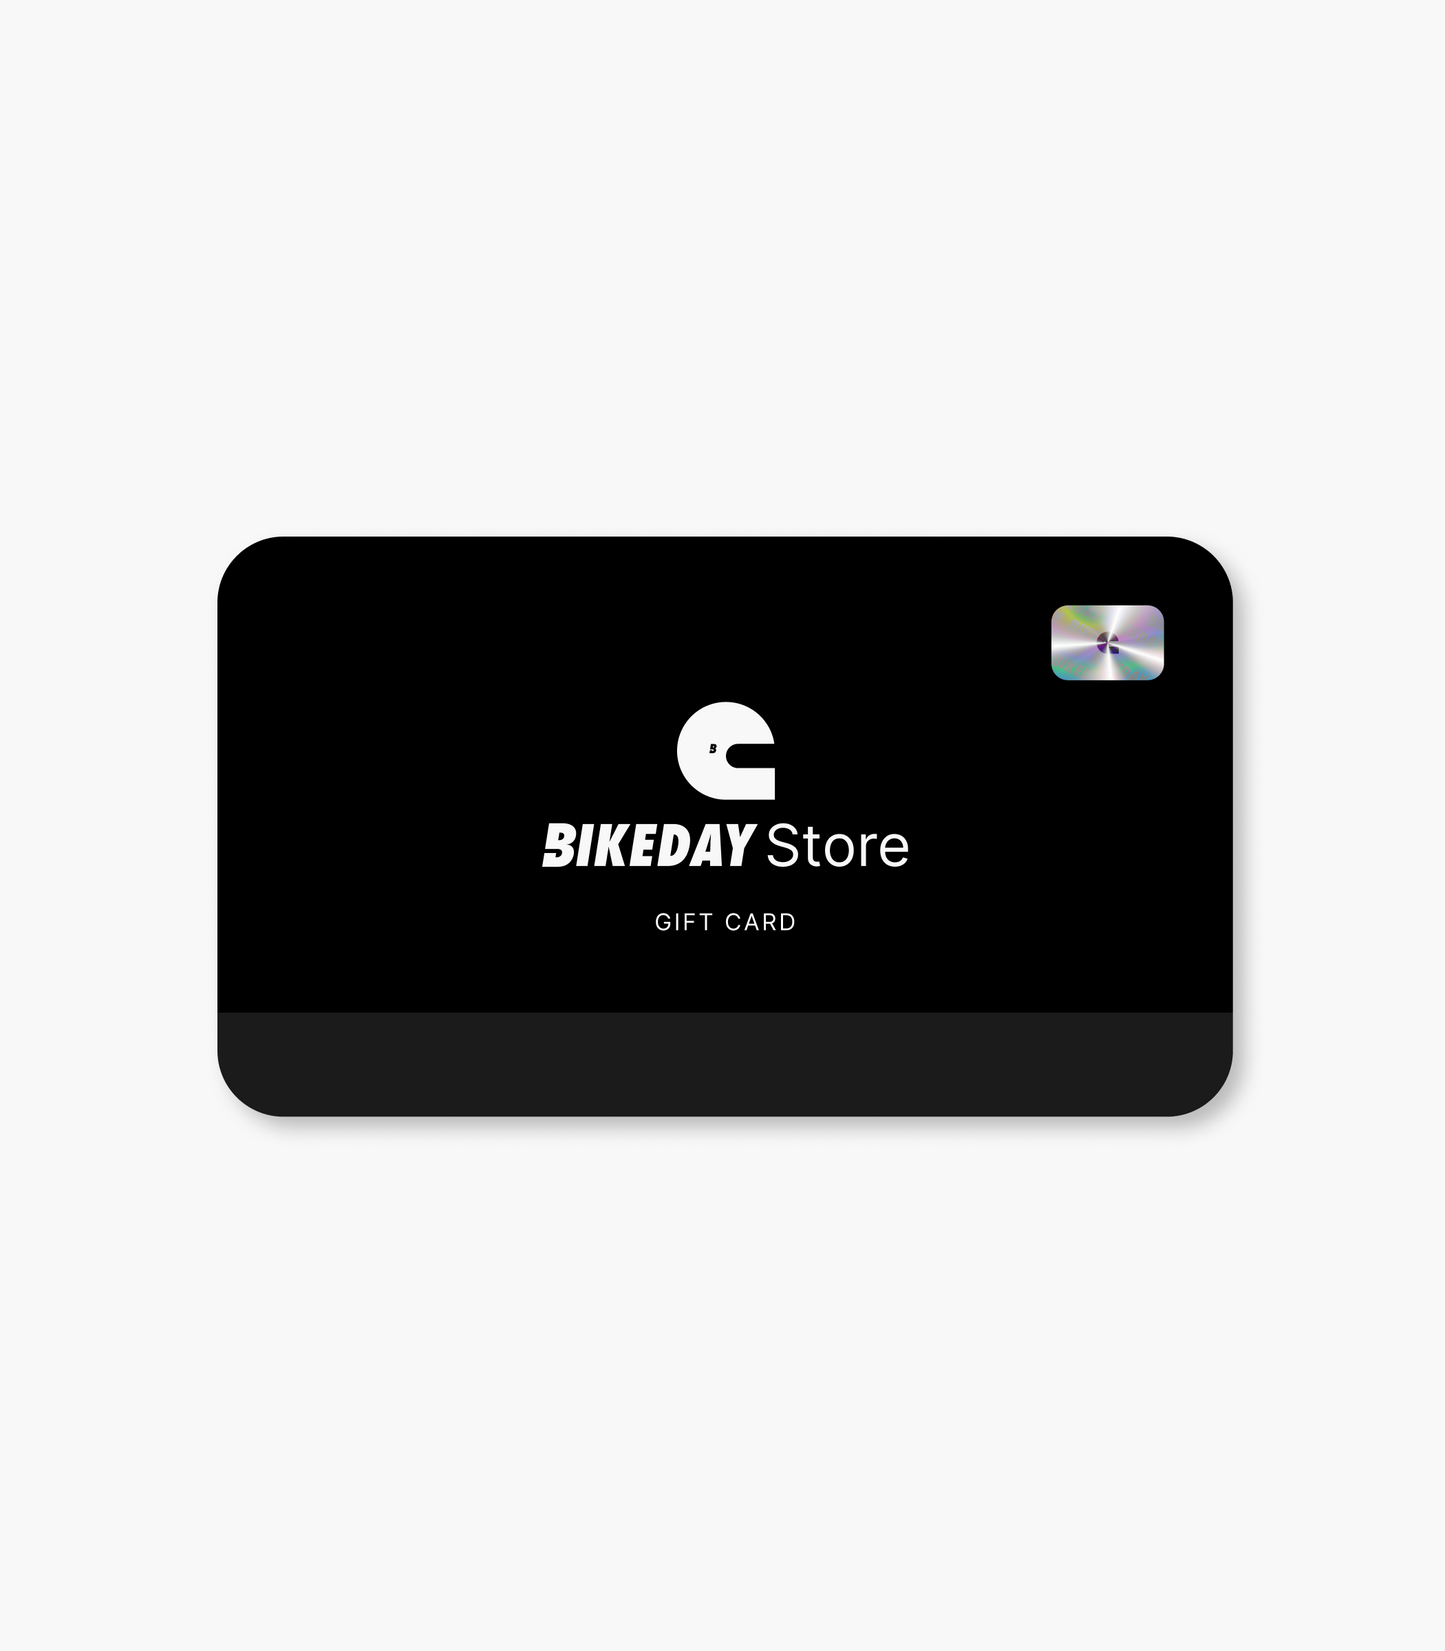 BIKEDAY Store Gift Card - 20% Off